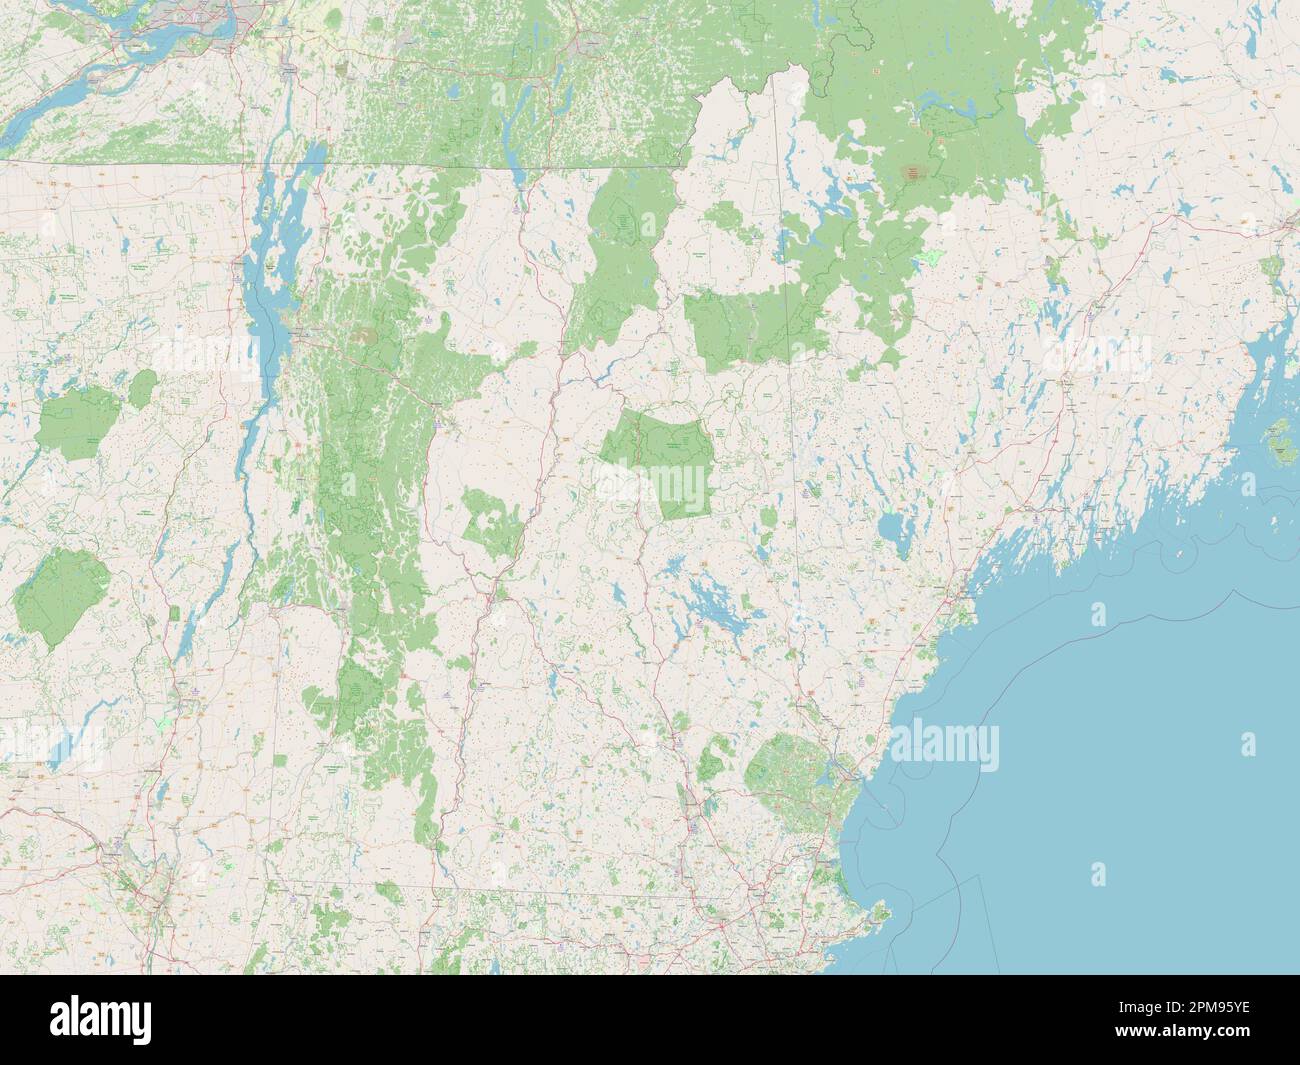 New Hampshire, state of United States of America. Open Street Map Stock Photo